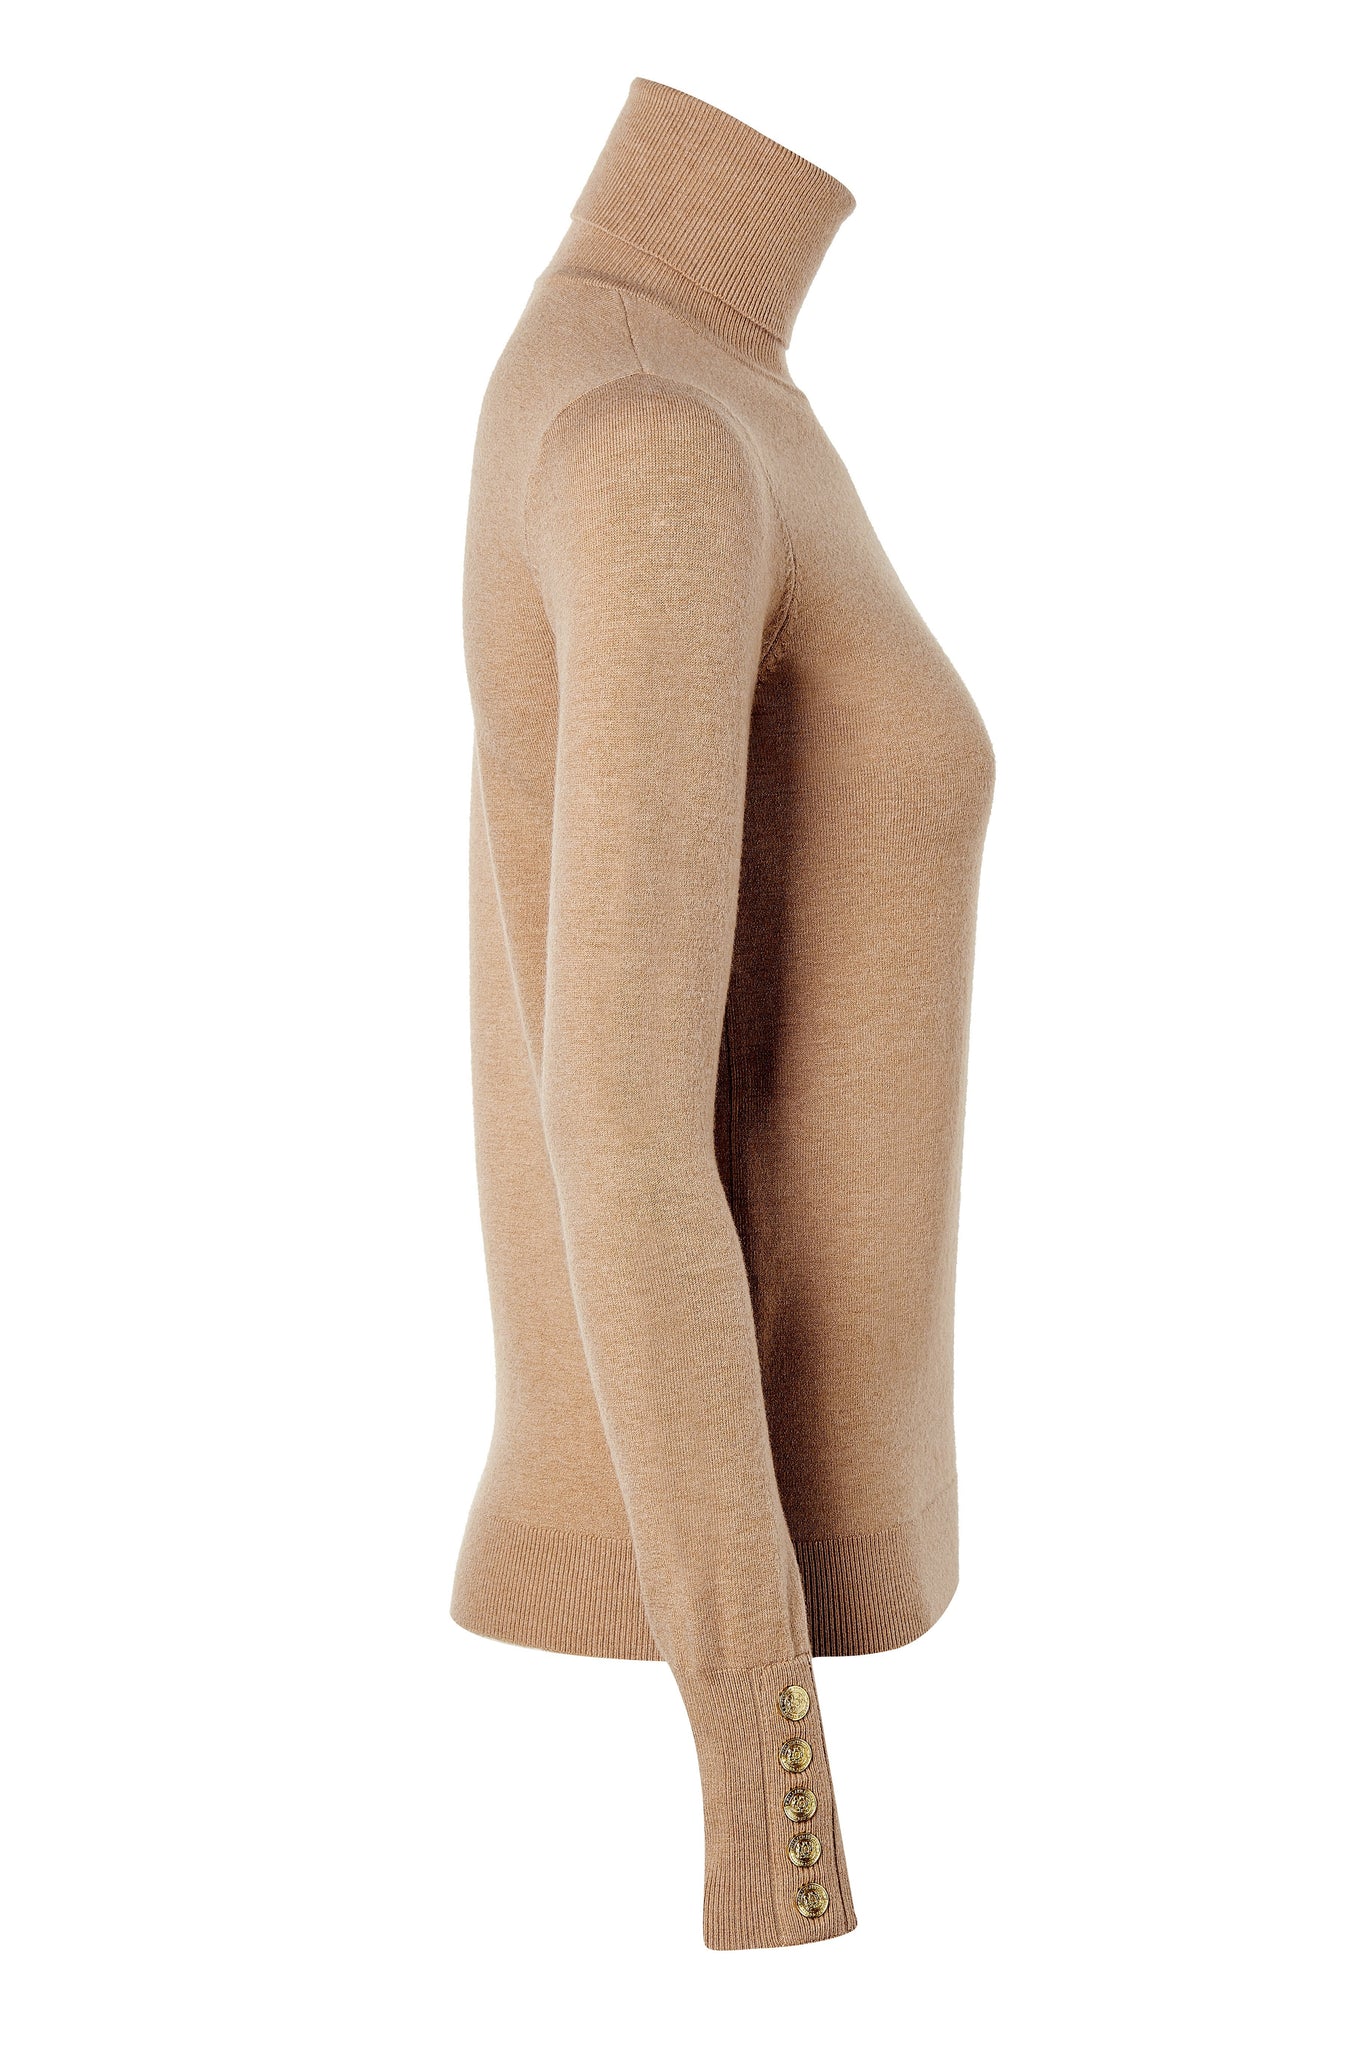 side of super soft lightweight jumper in dark camel with ribbed roll neck collar, cuffs and hem